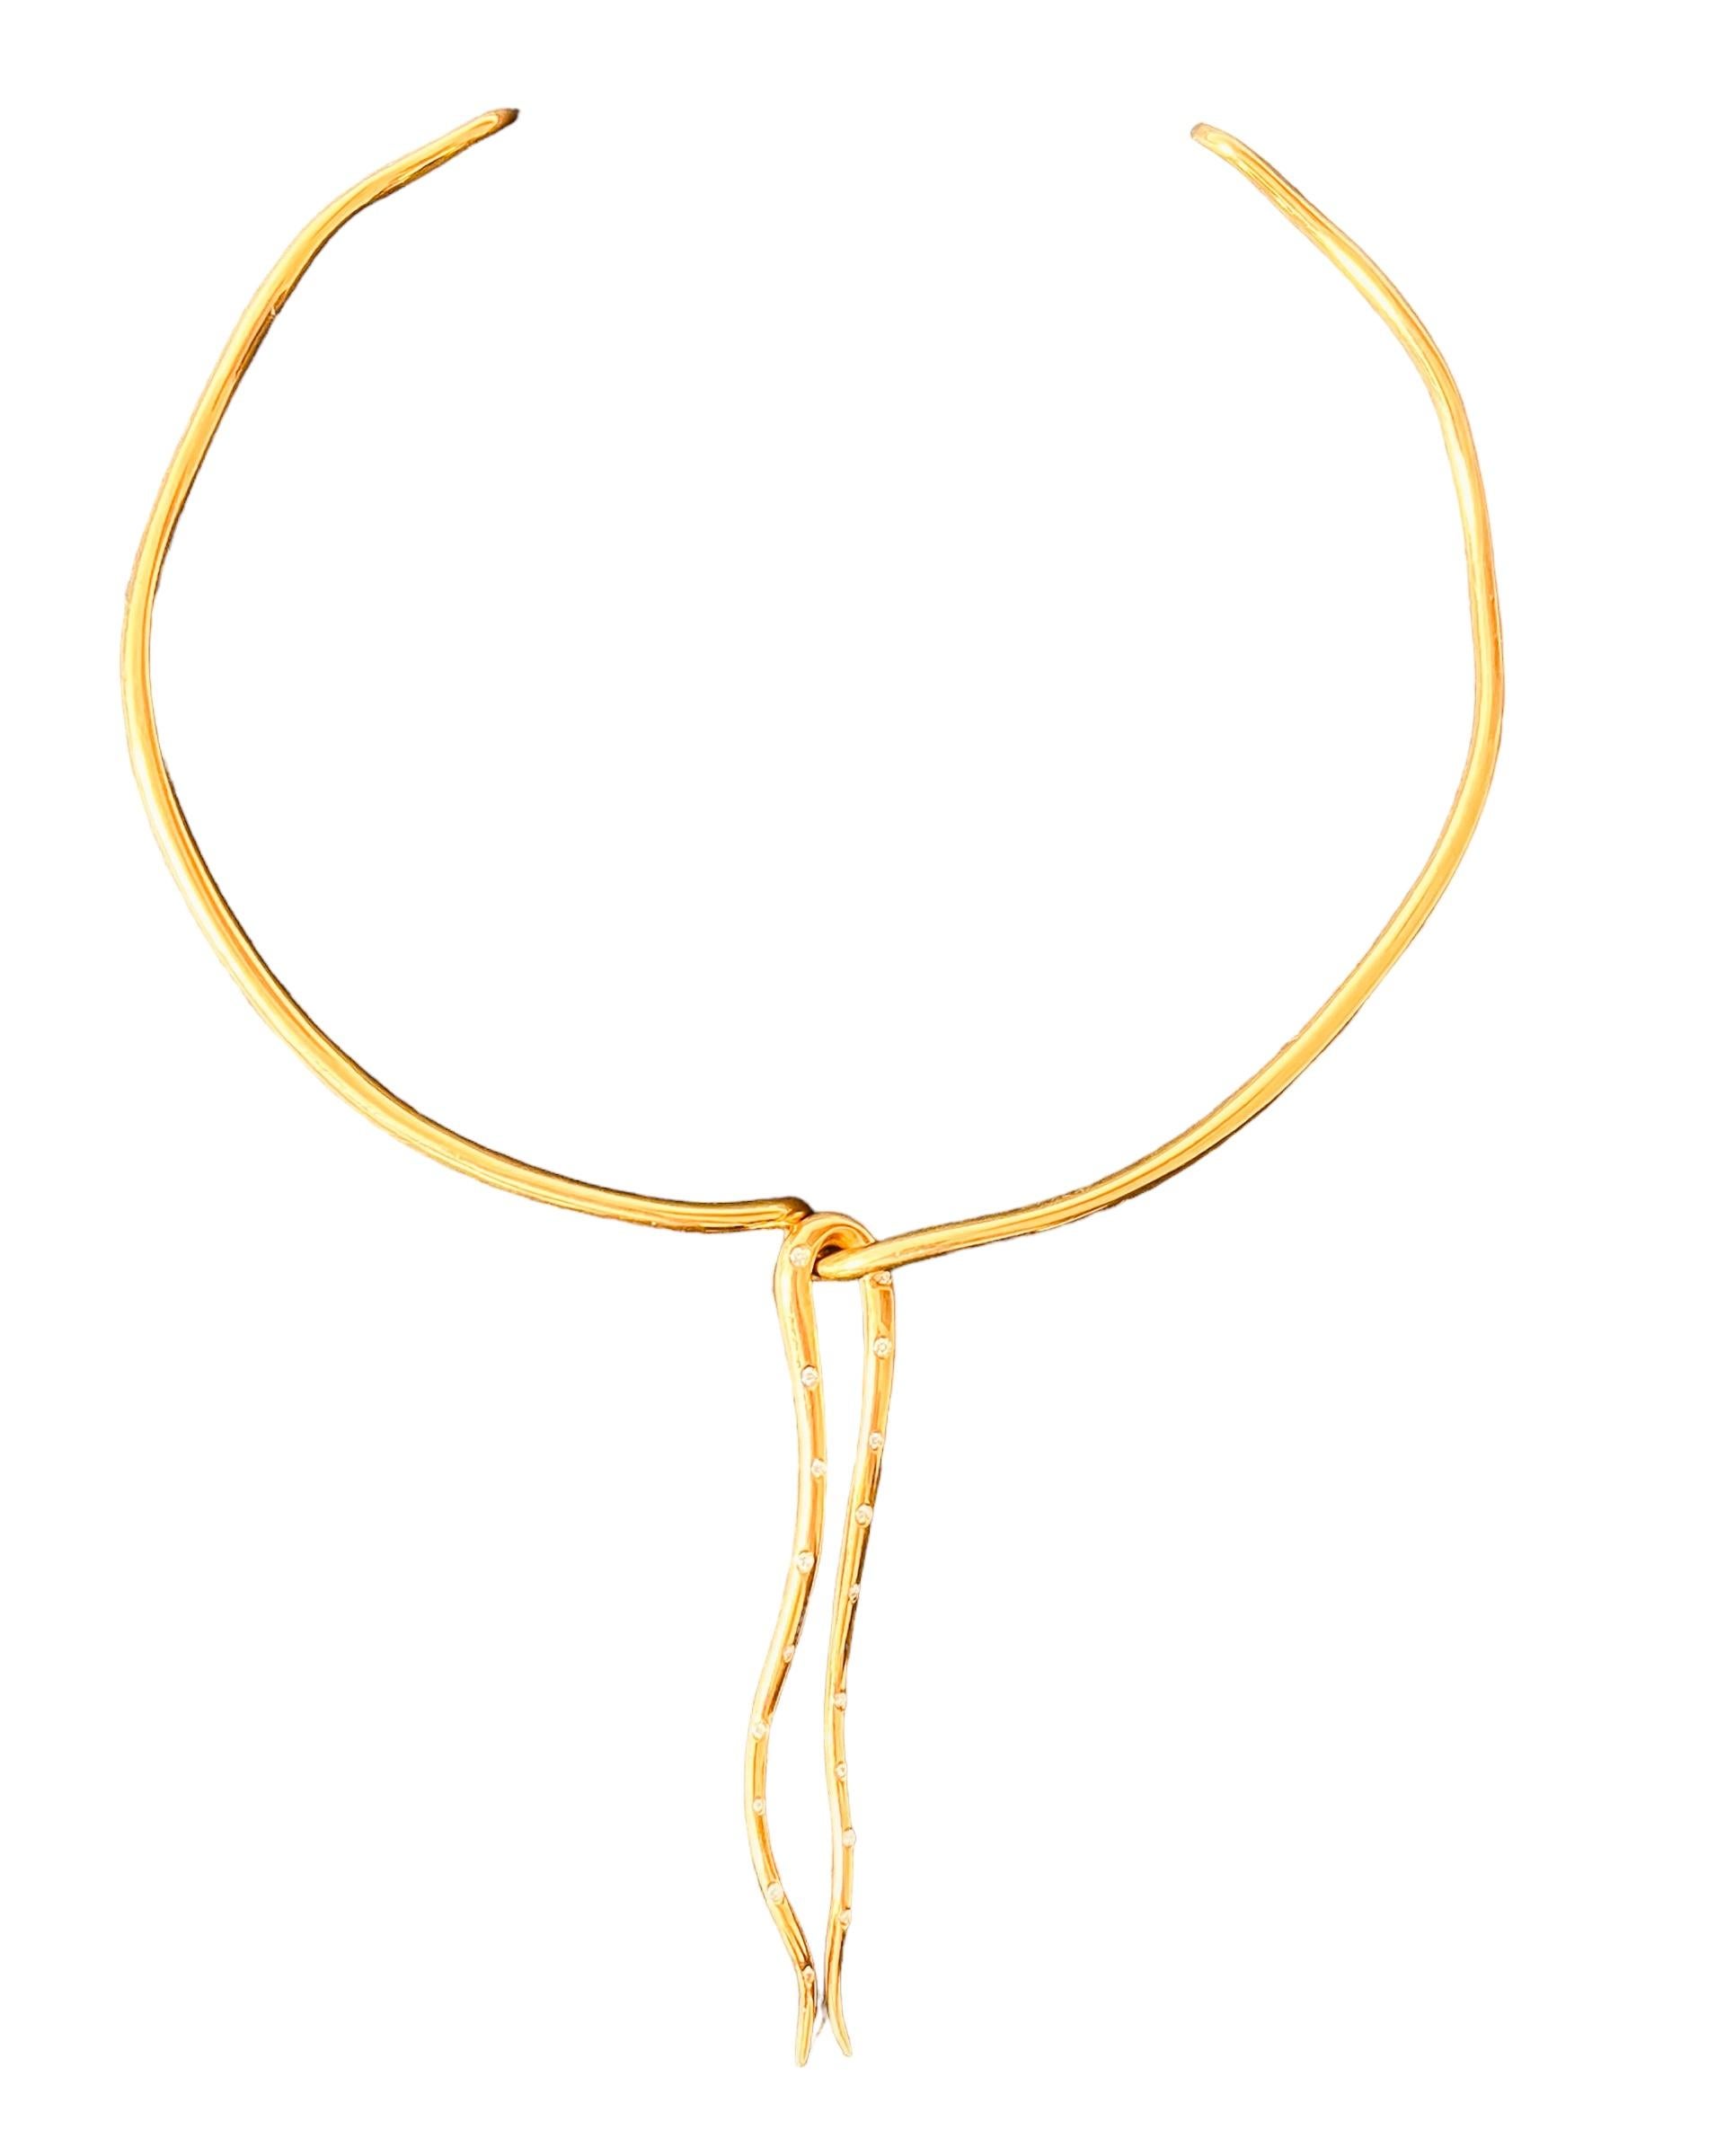 18ct Yellow Gold Undulating Choker With A 0.2ct Diamond Set Abstract Pendant For Sale 10